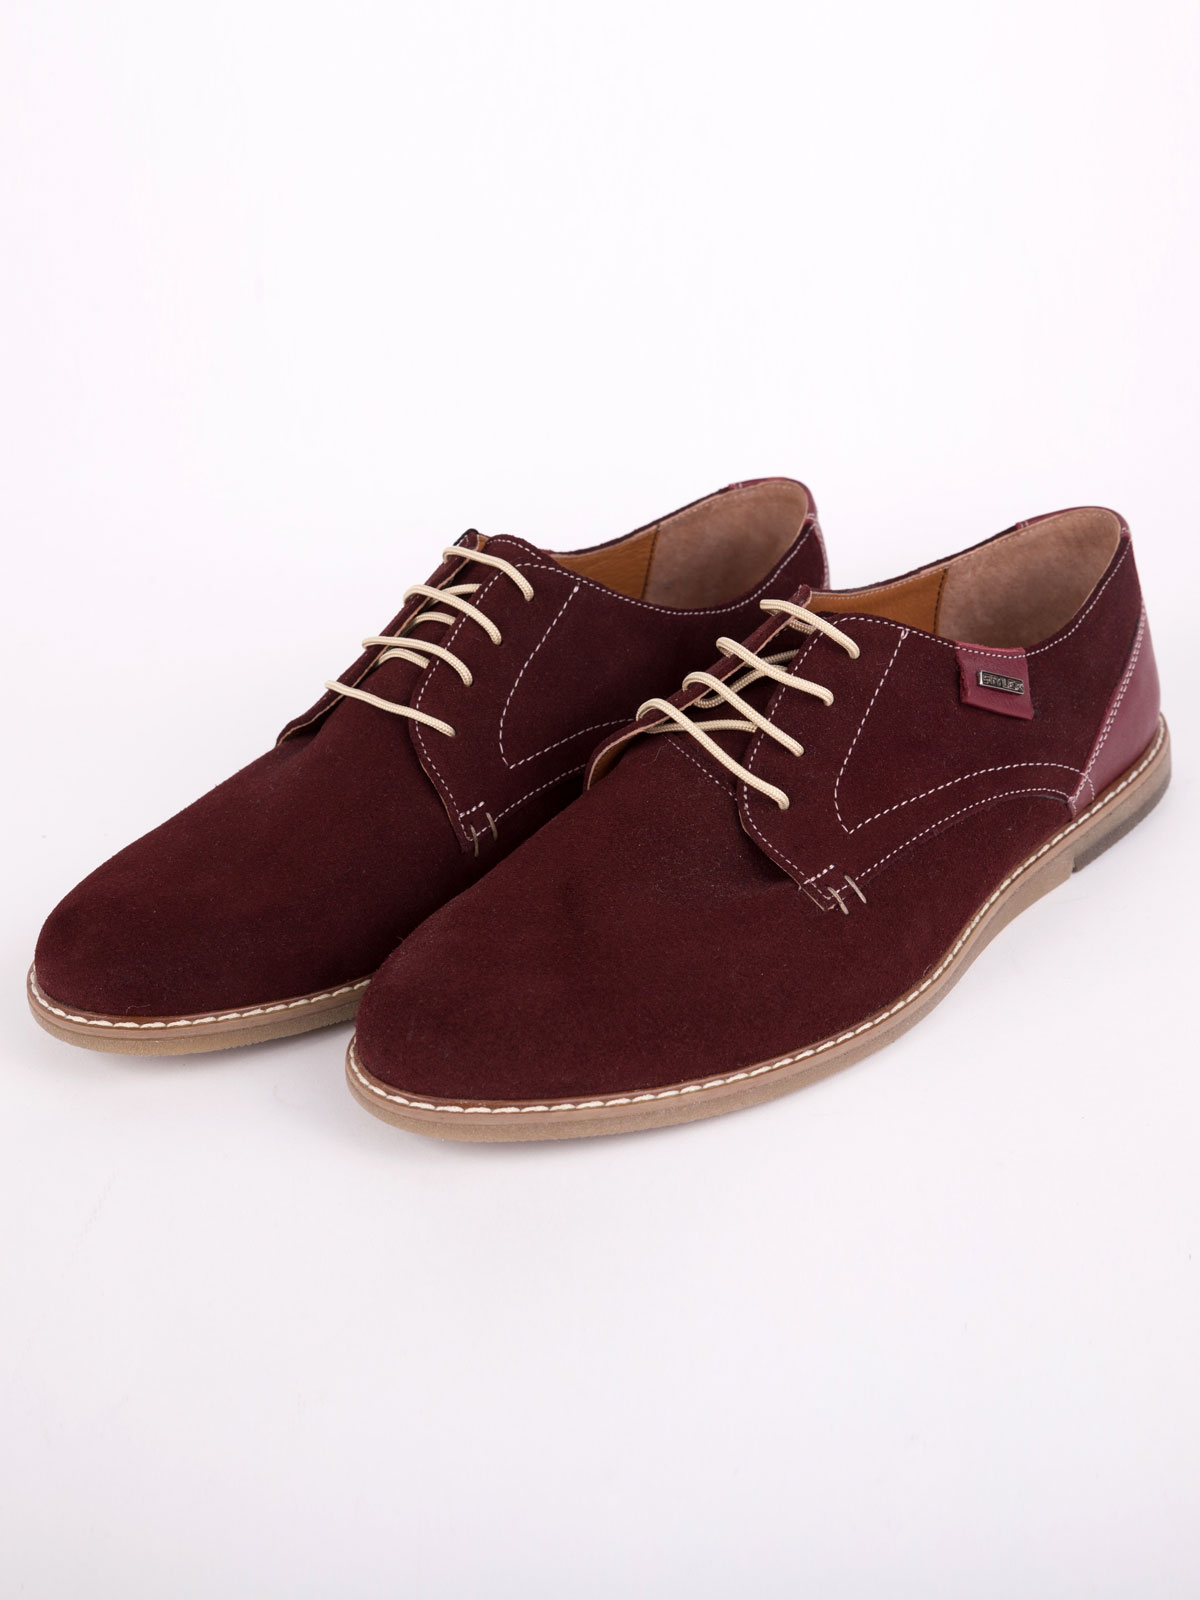 Suede shoes with laces - 81076 - € 50.06 img3